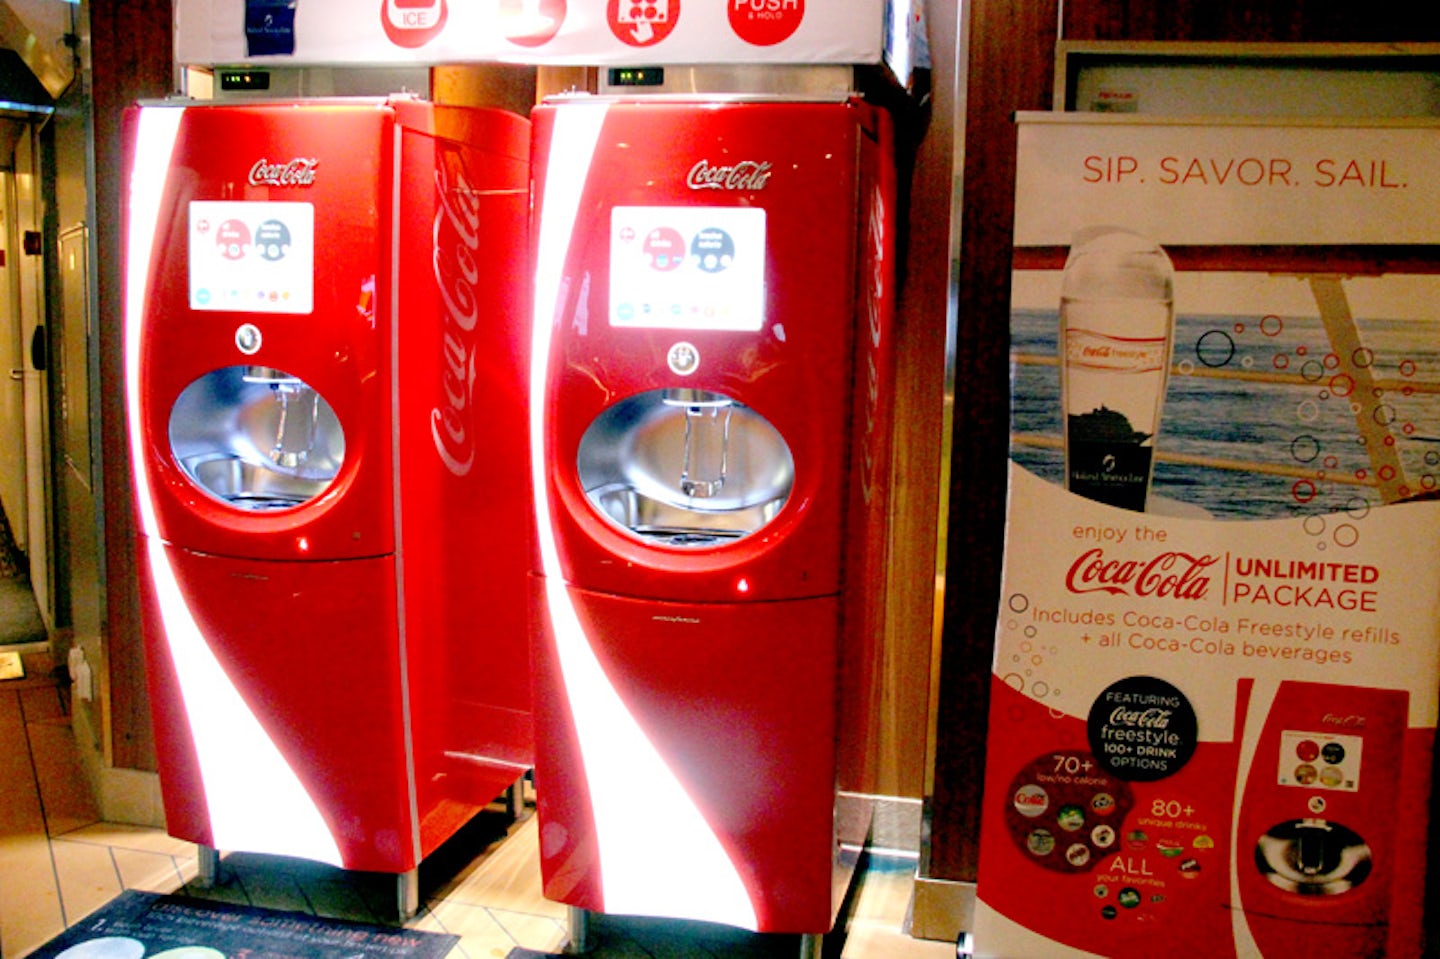 Coke machine drinks for $8/day